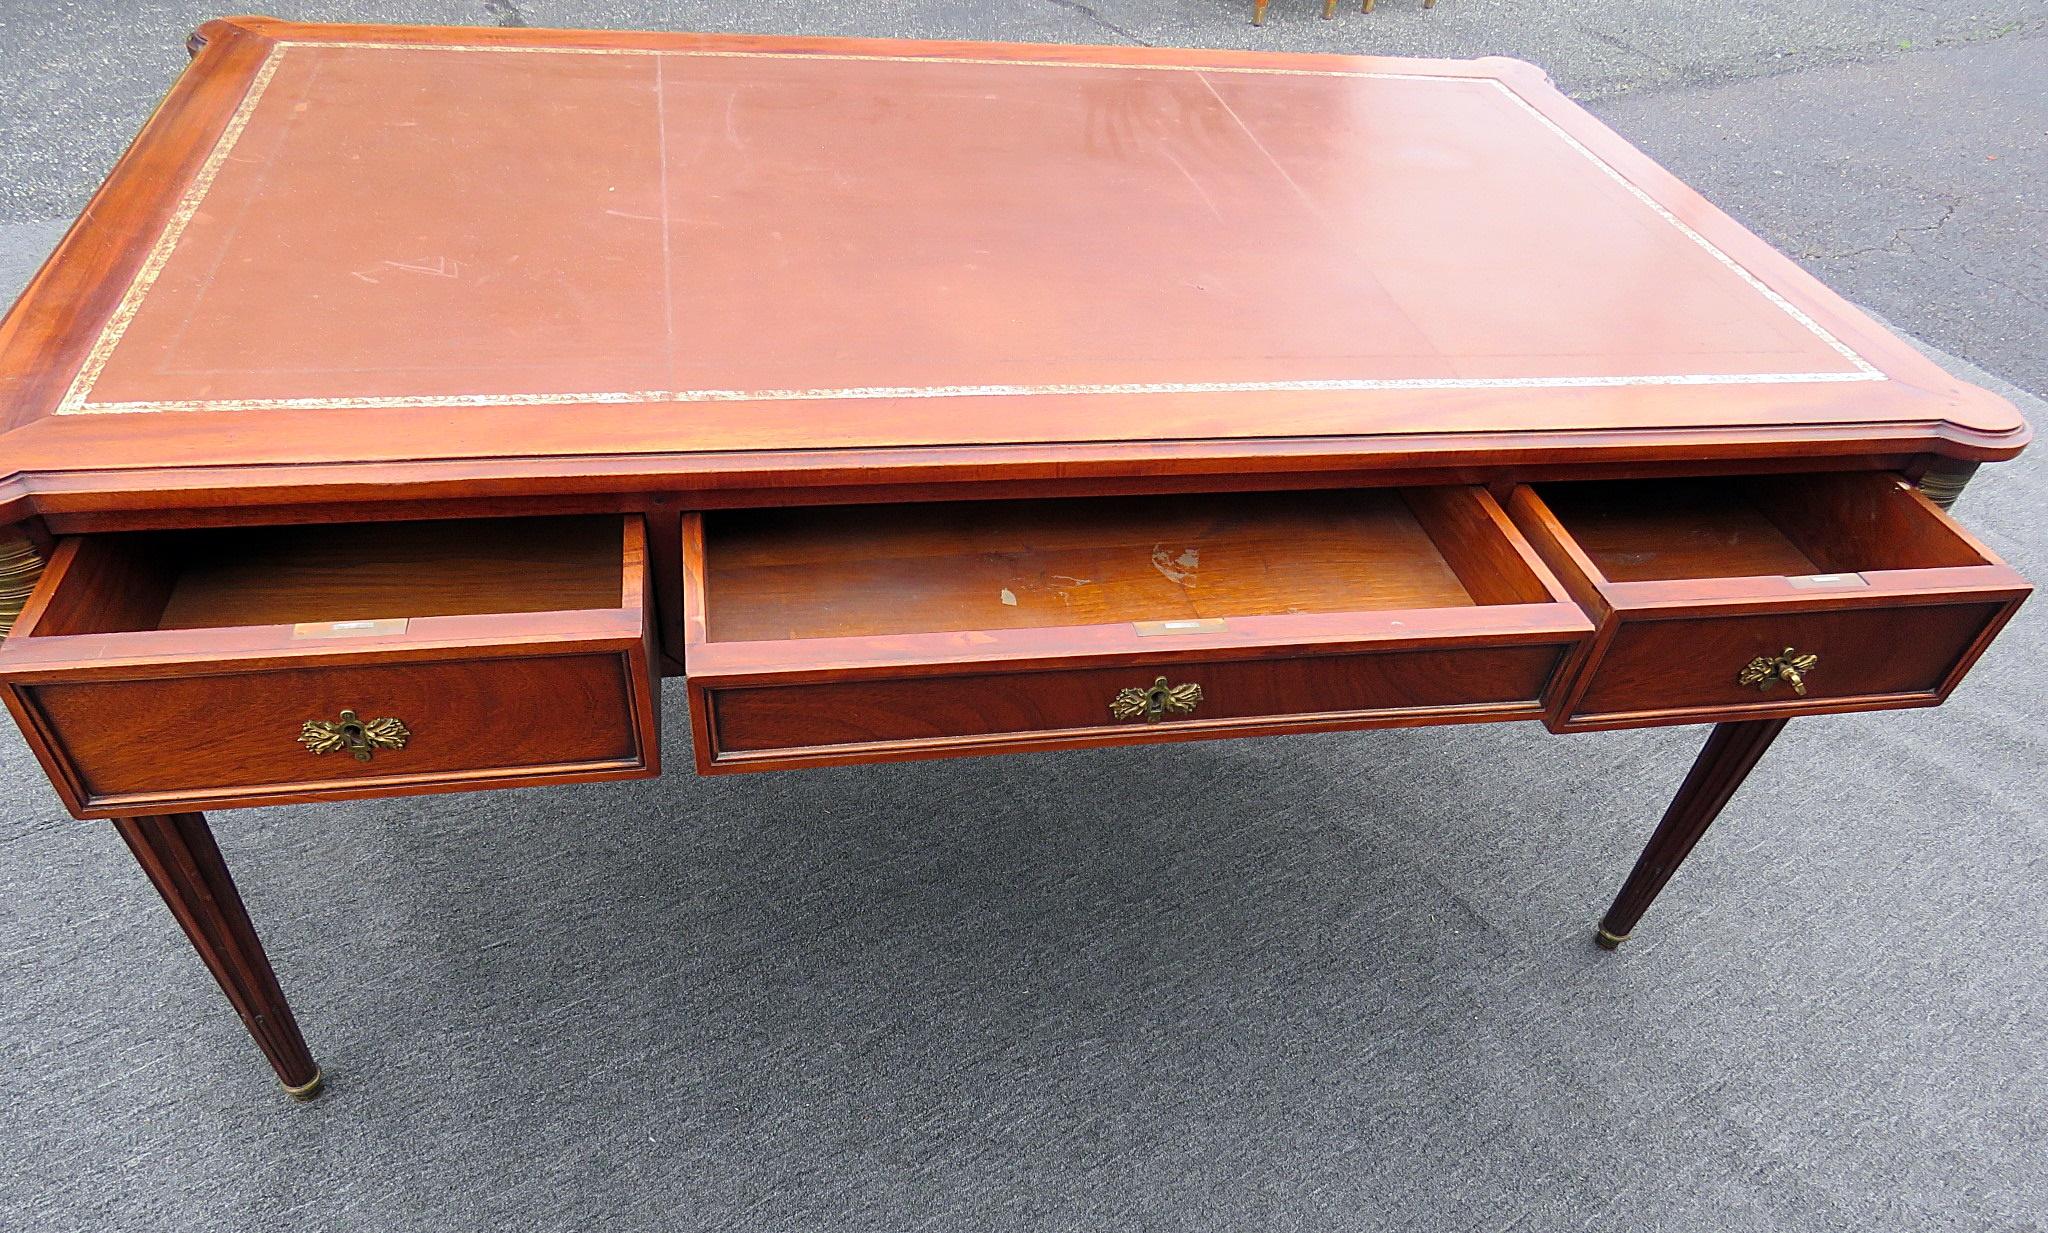 Maison Jansen Louis XVI style leather top desk with three drawers and two slide out extensions. Extends to 94